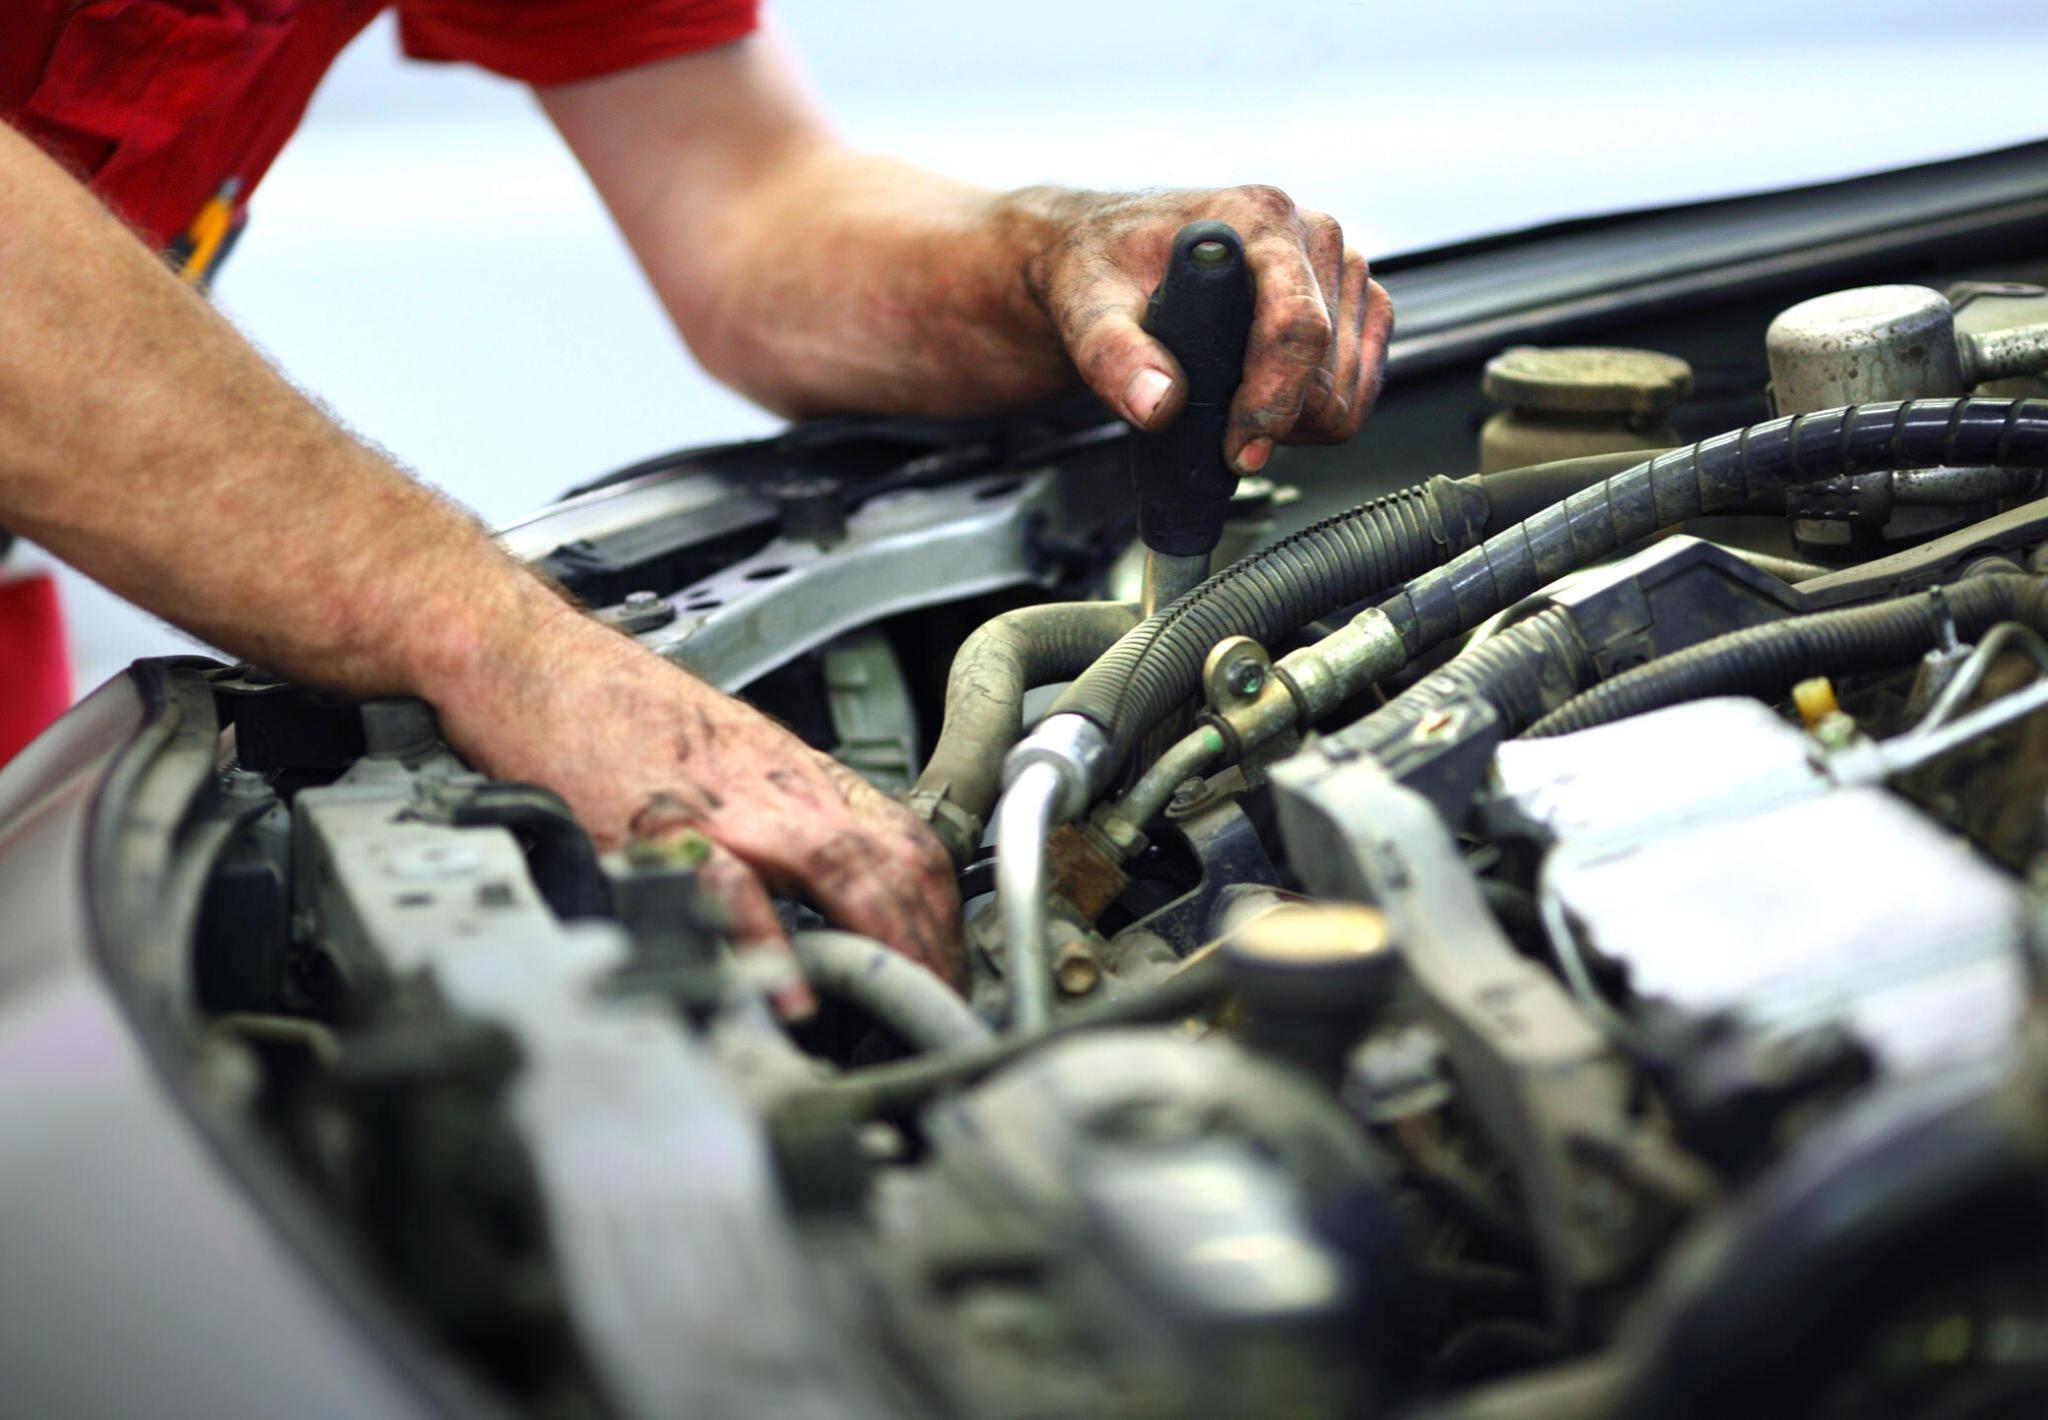 Best Car Check Hoses Services In Texas- Express Auto Irving, The Best Car Tune Ups Services In Texas- Express Auto Irving